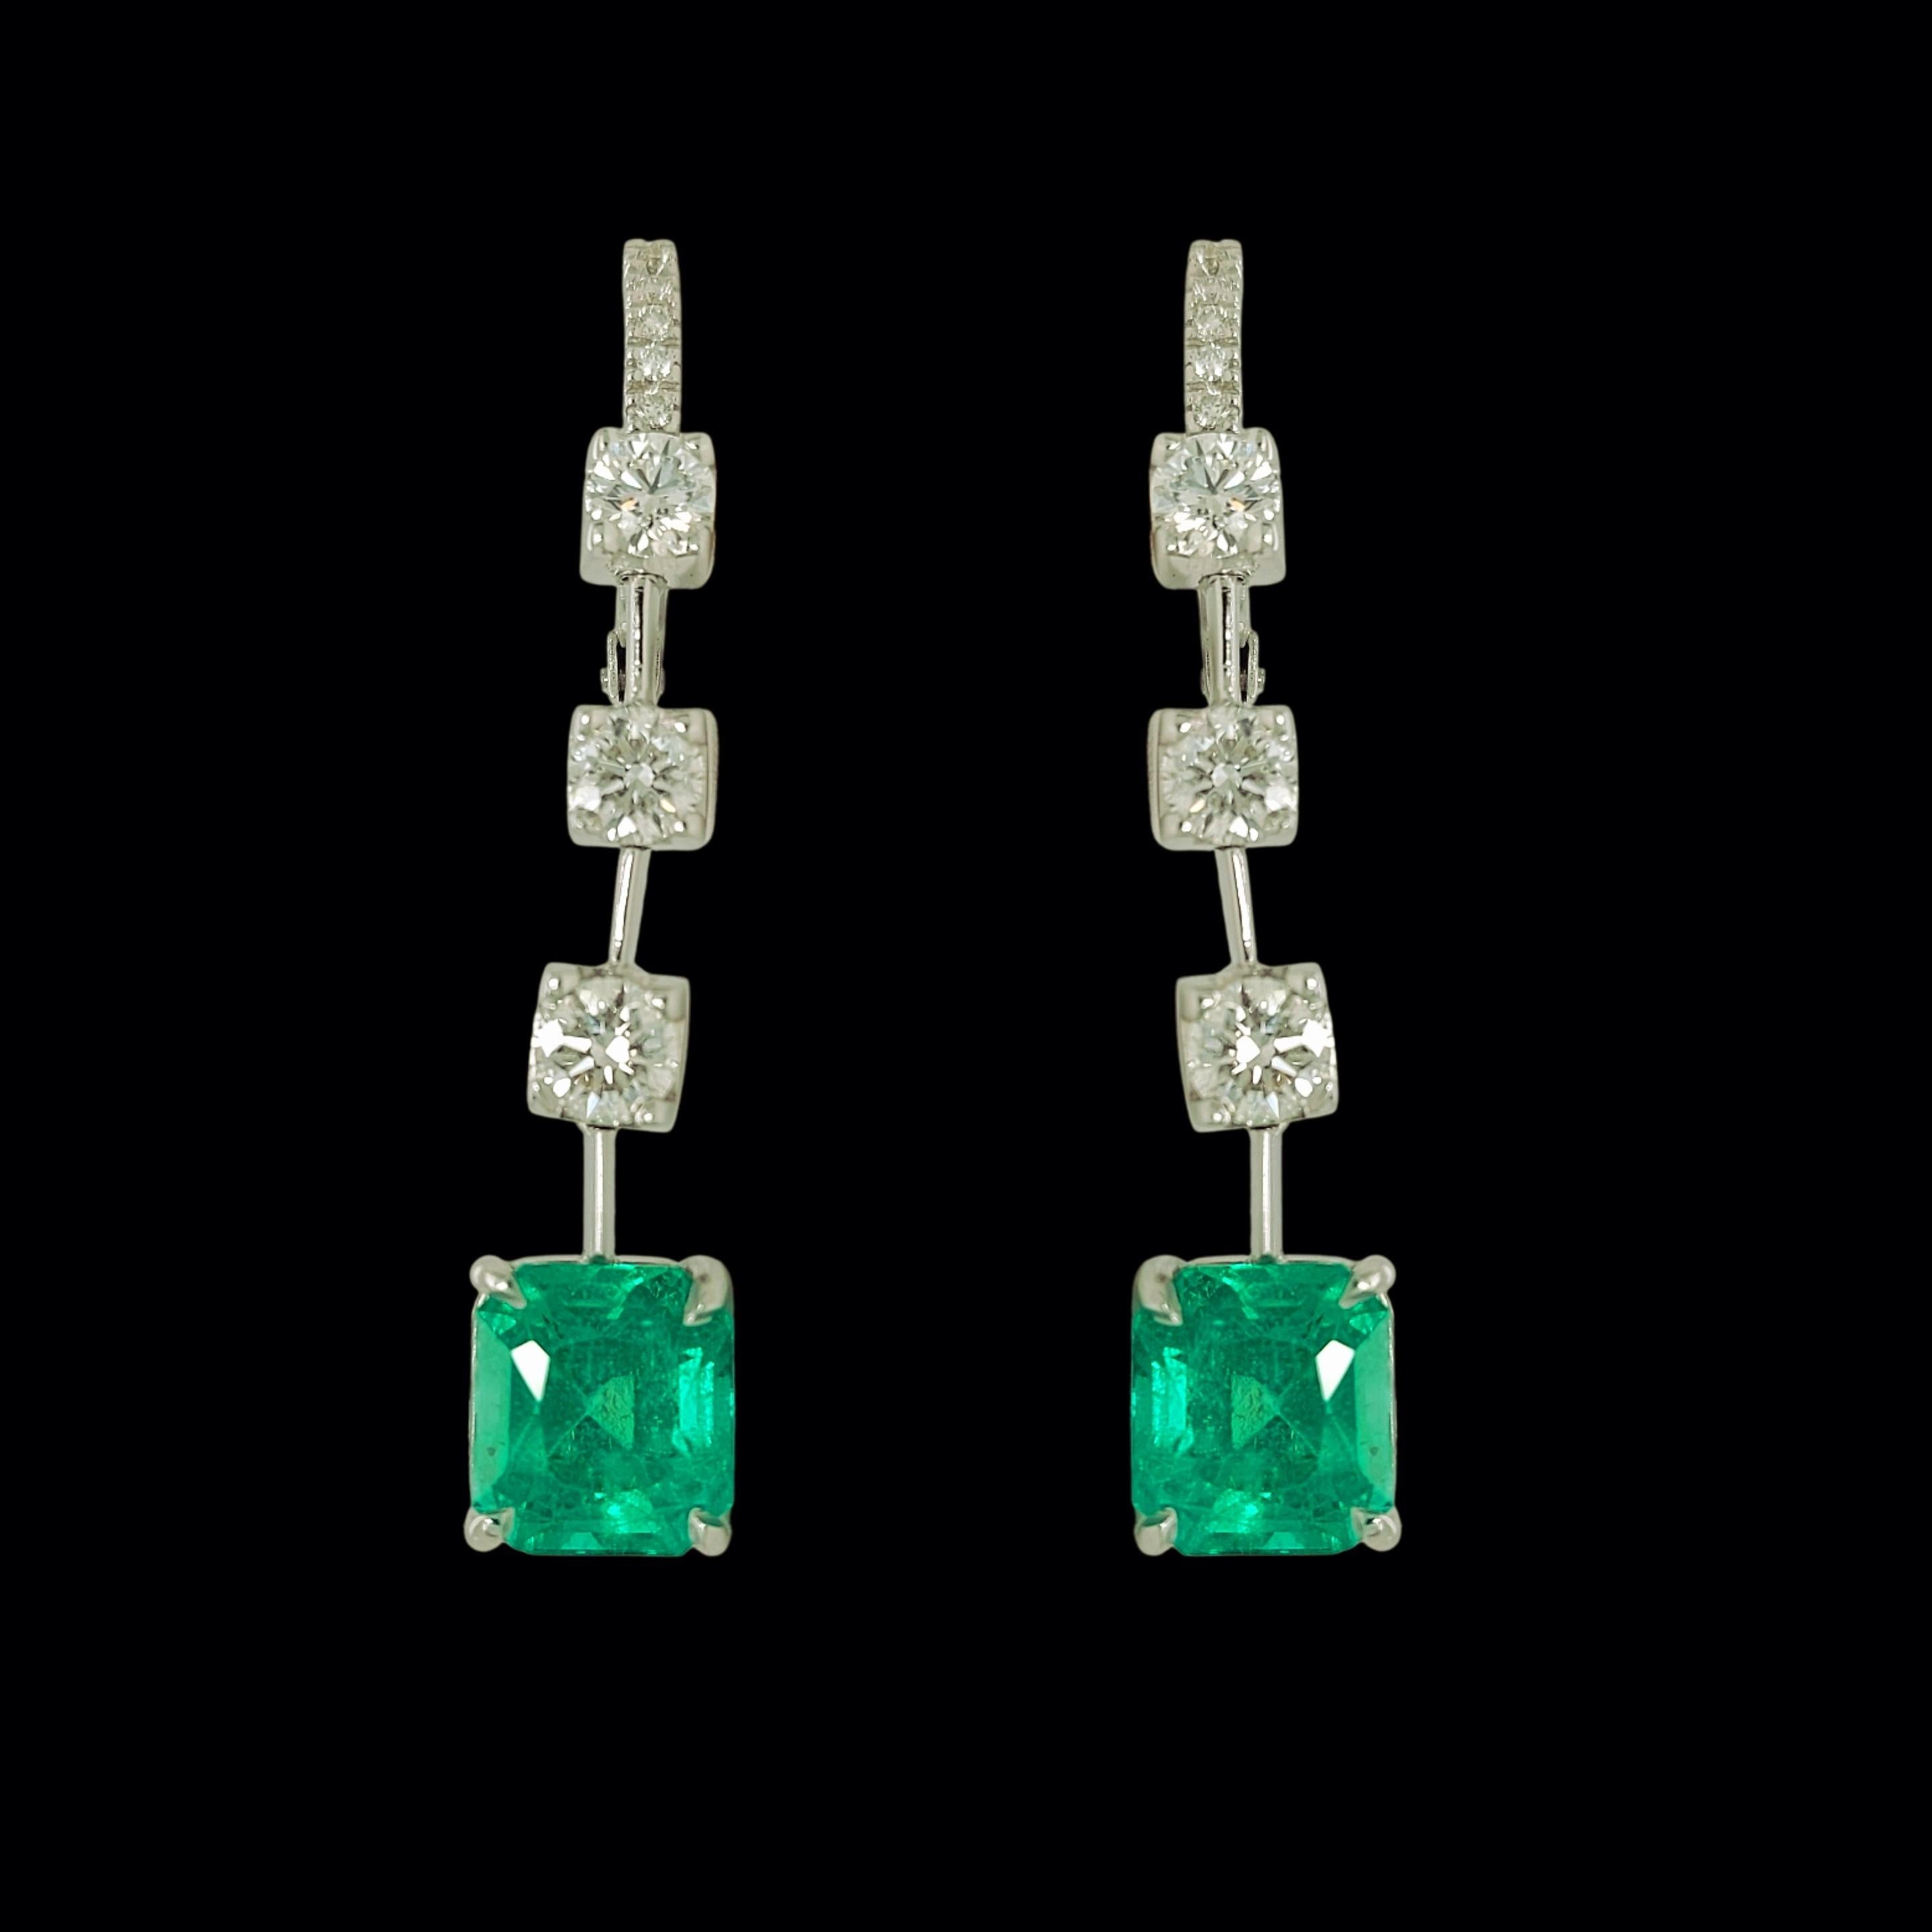 Magnificent Dangling Earrings with 5.29ct Colombian Emerald, 1.51ct Diamonds For Sale 4